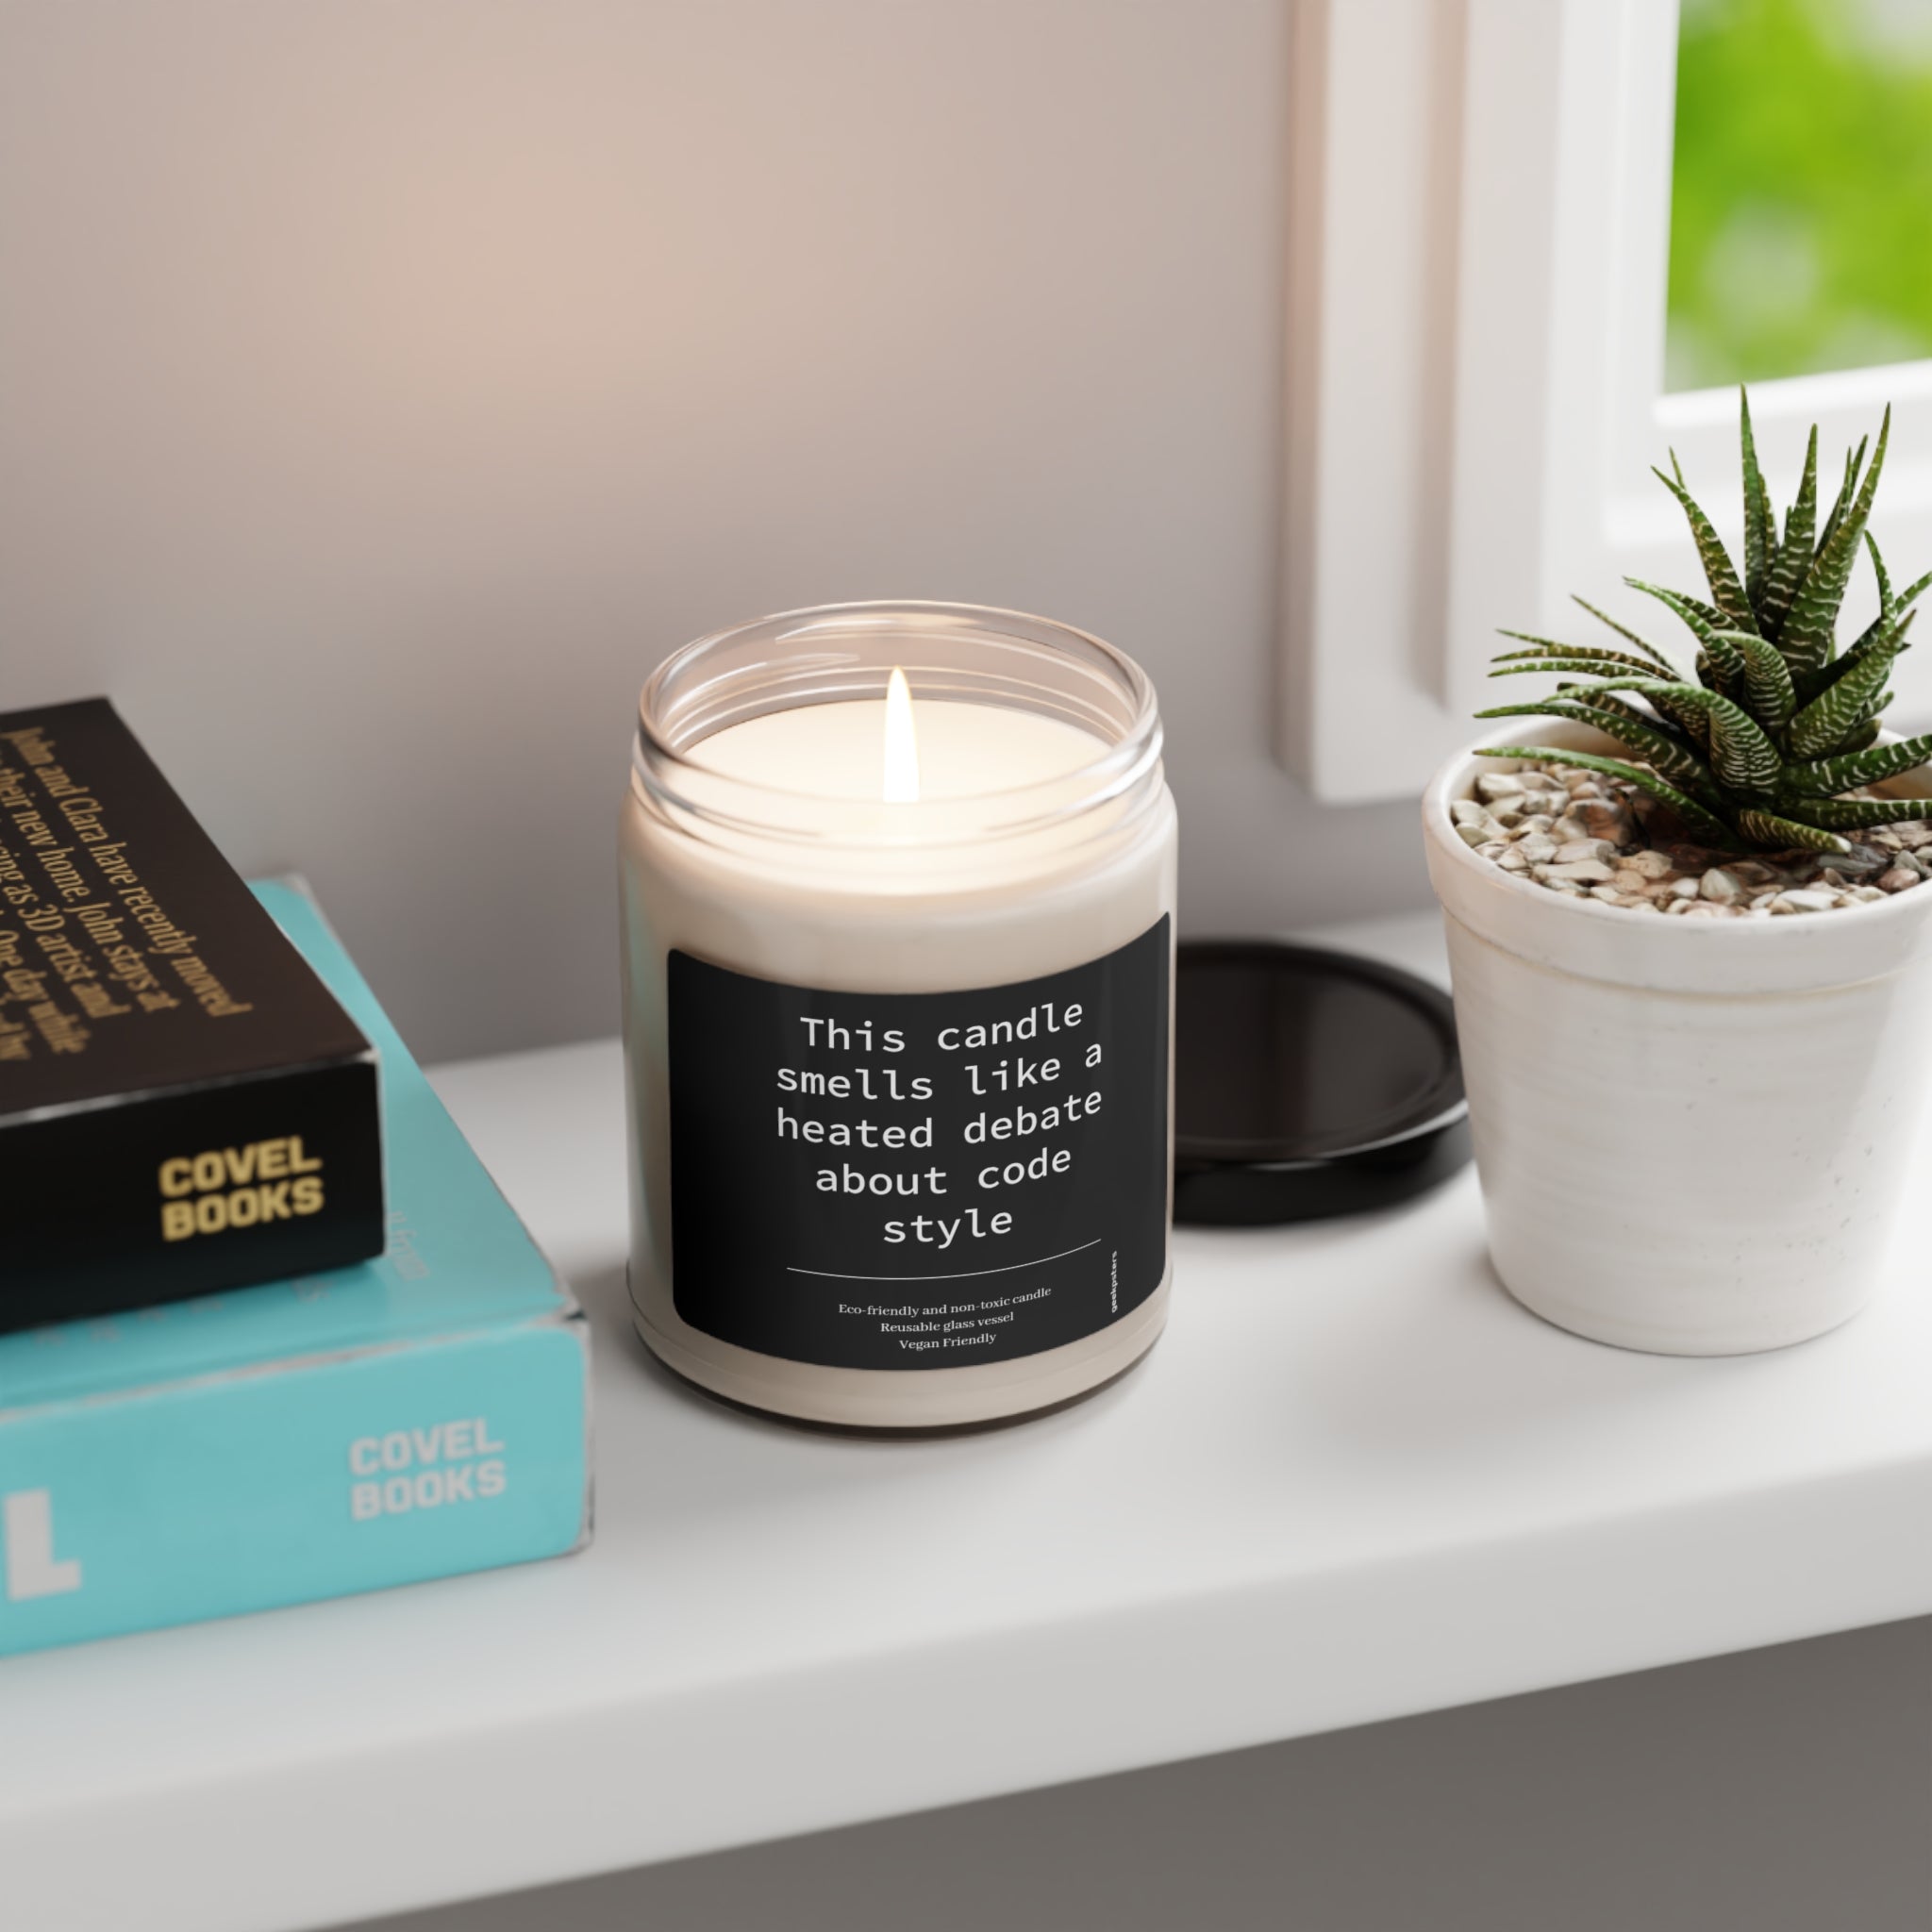 A lit This Candle Smells Like a Heated Debate About Code Style- Scented Soy Candle, 9oz made from a soy wax blend on a windowsill with books and a potted plant.